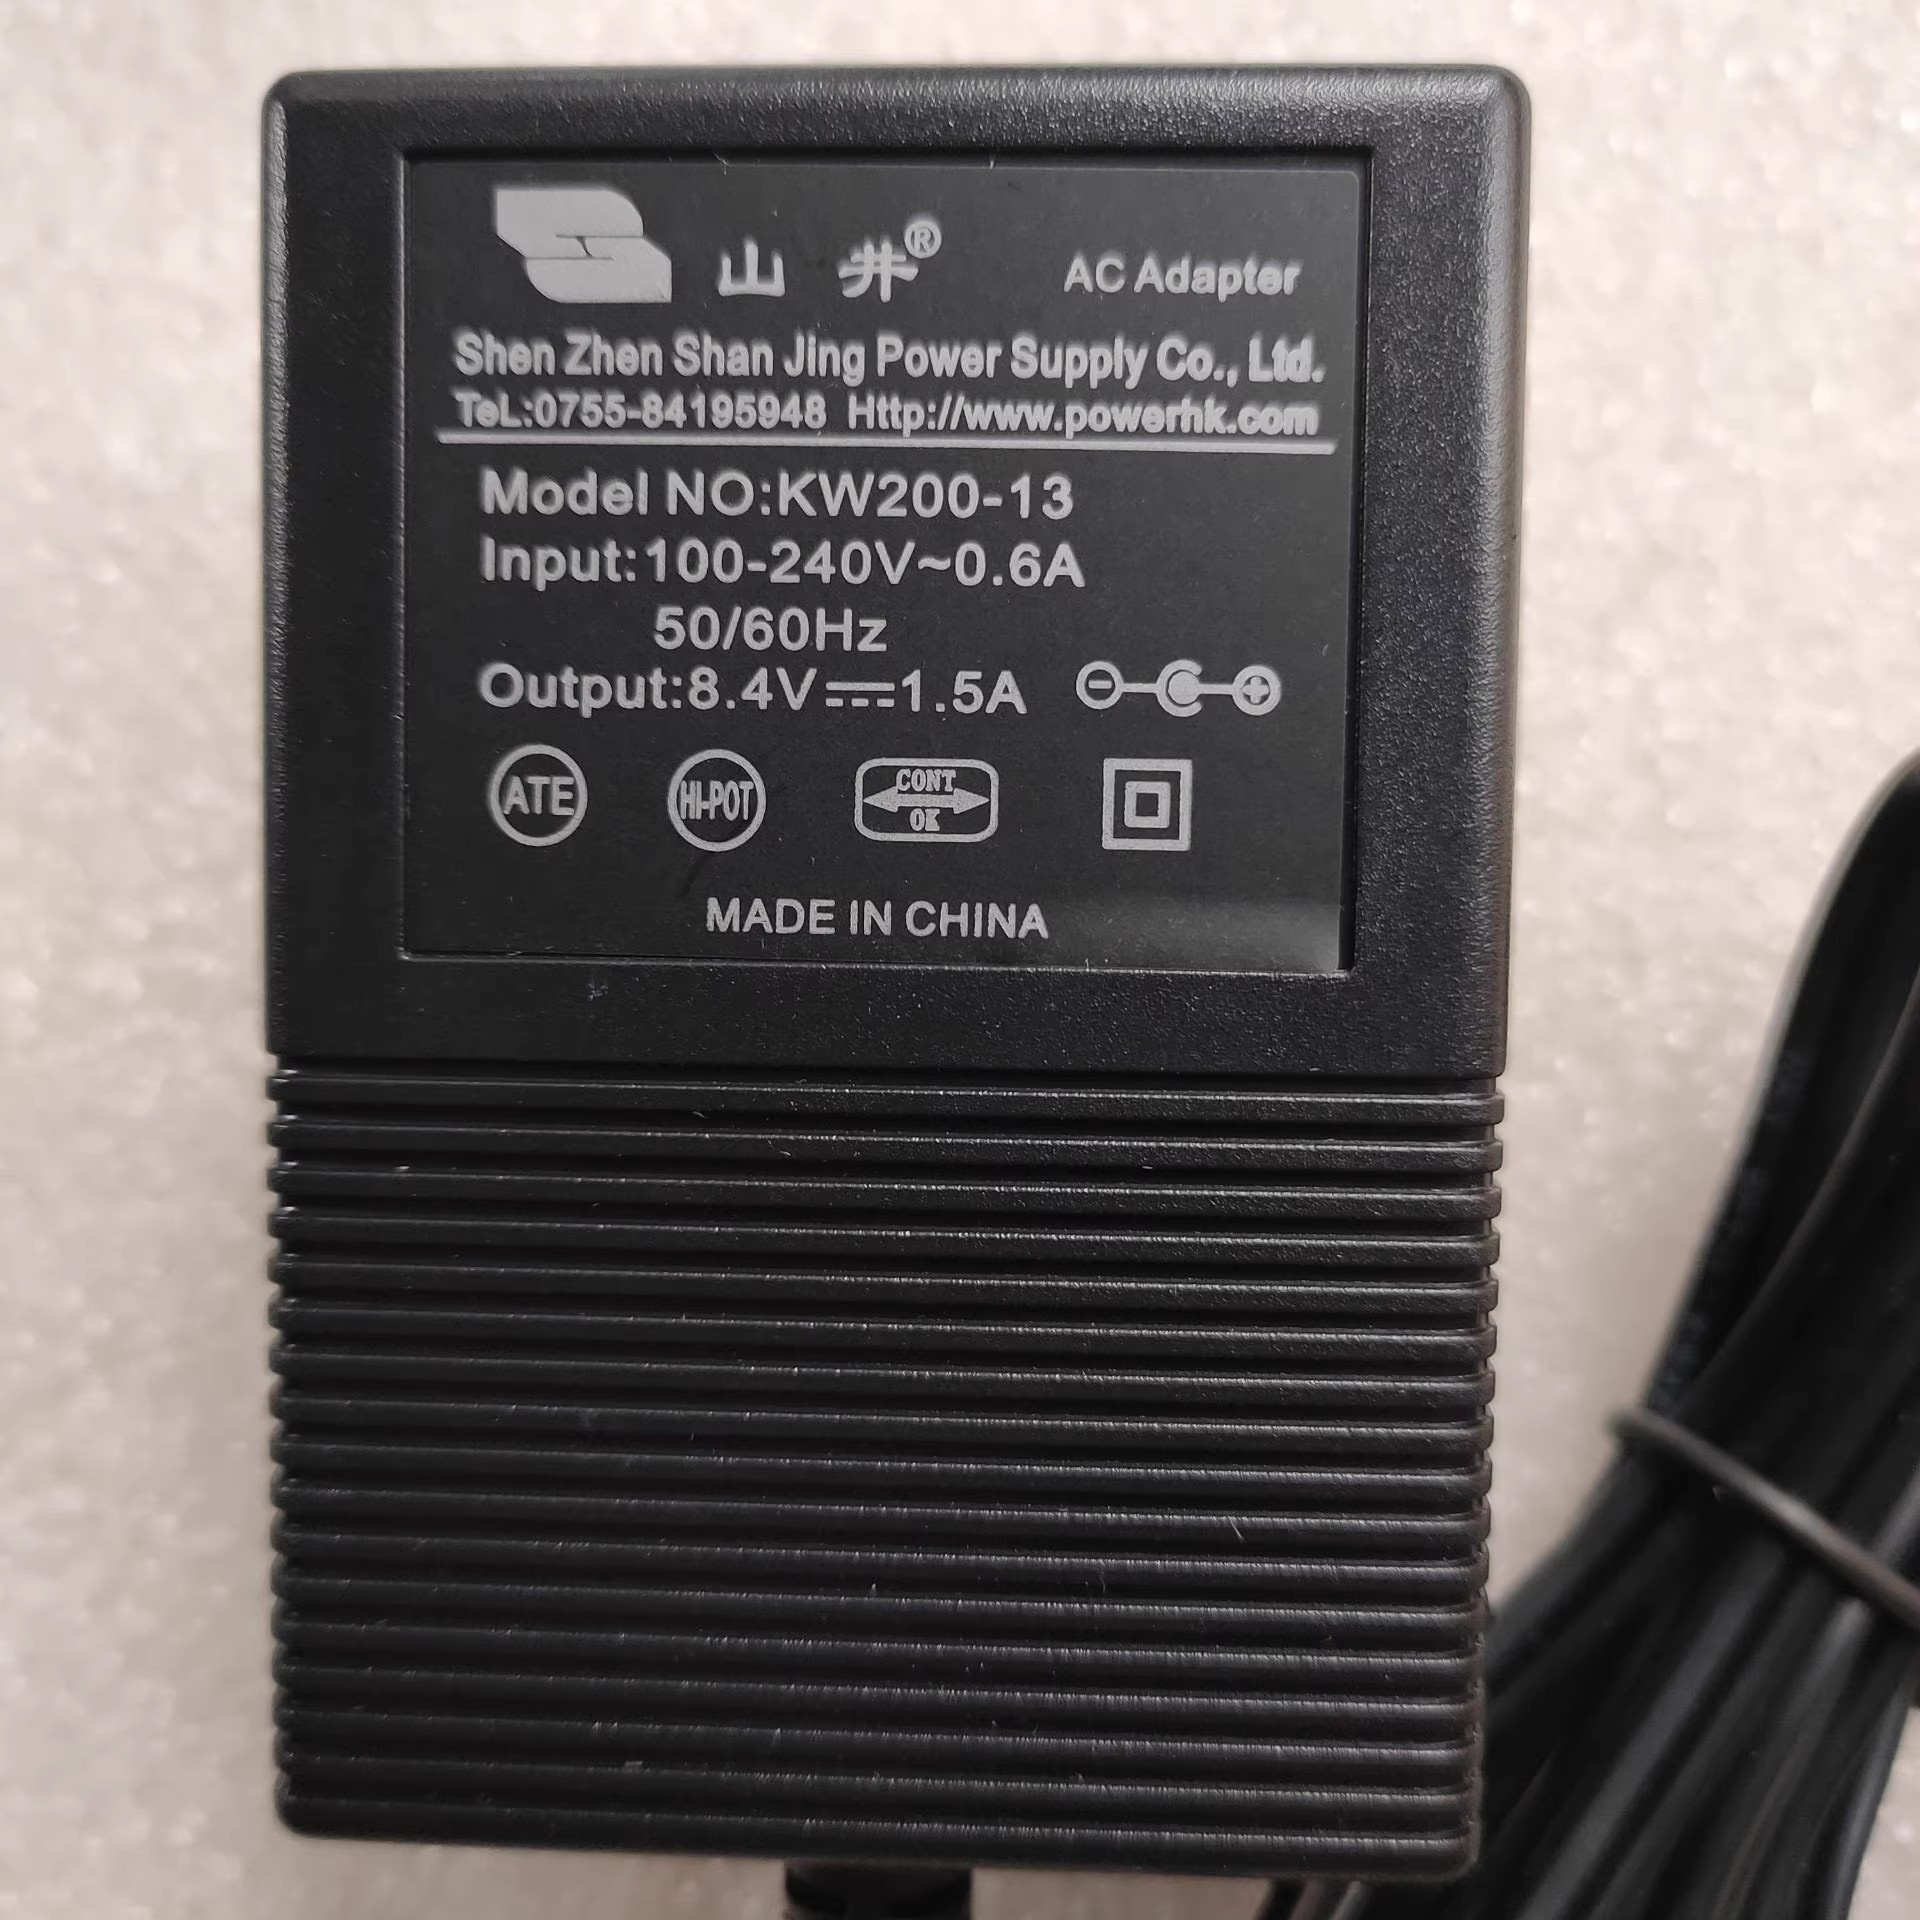 *Brand NEW* KW20-13 8.4V 1.5A AC DC ADAPTHE POWER Supply